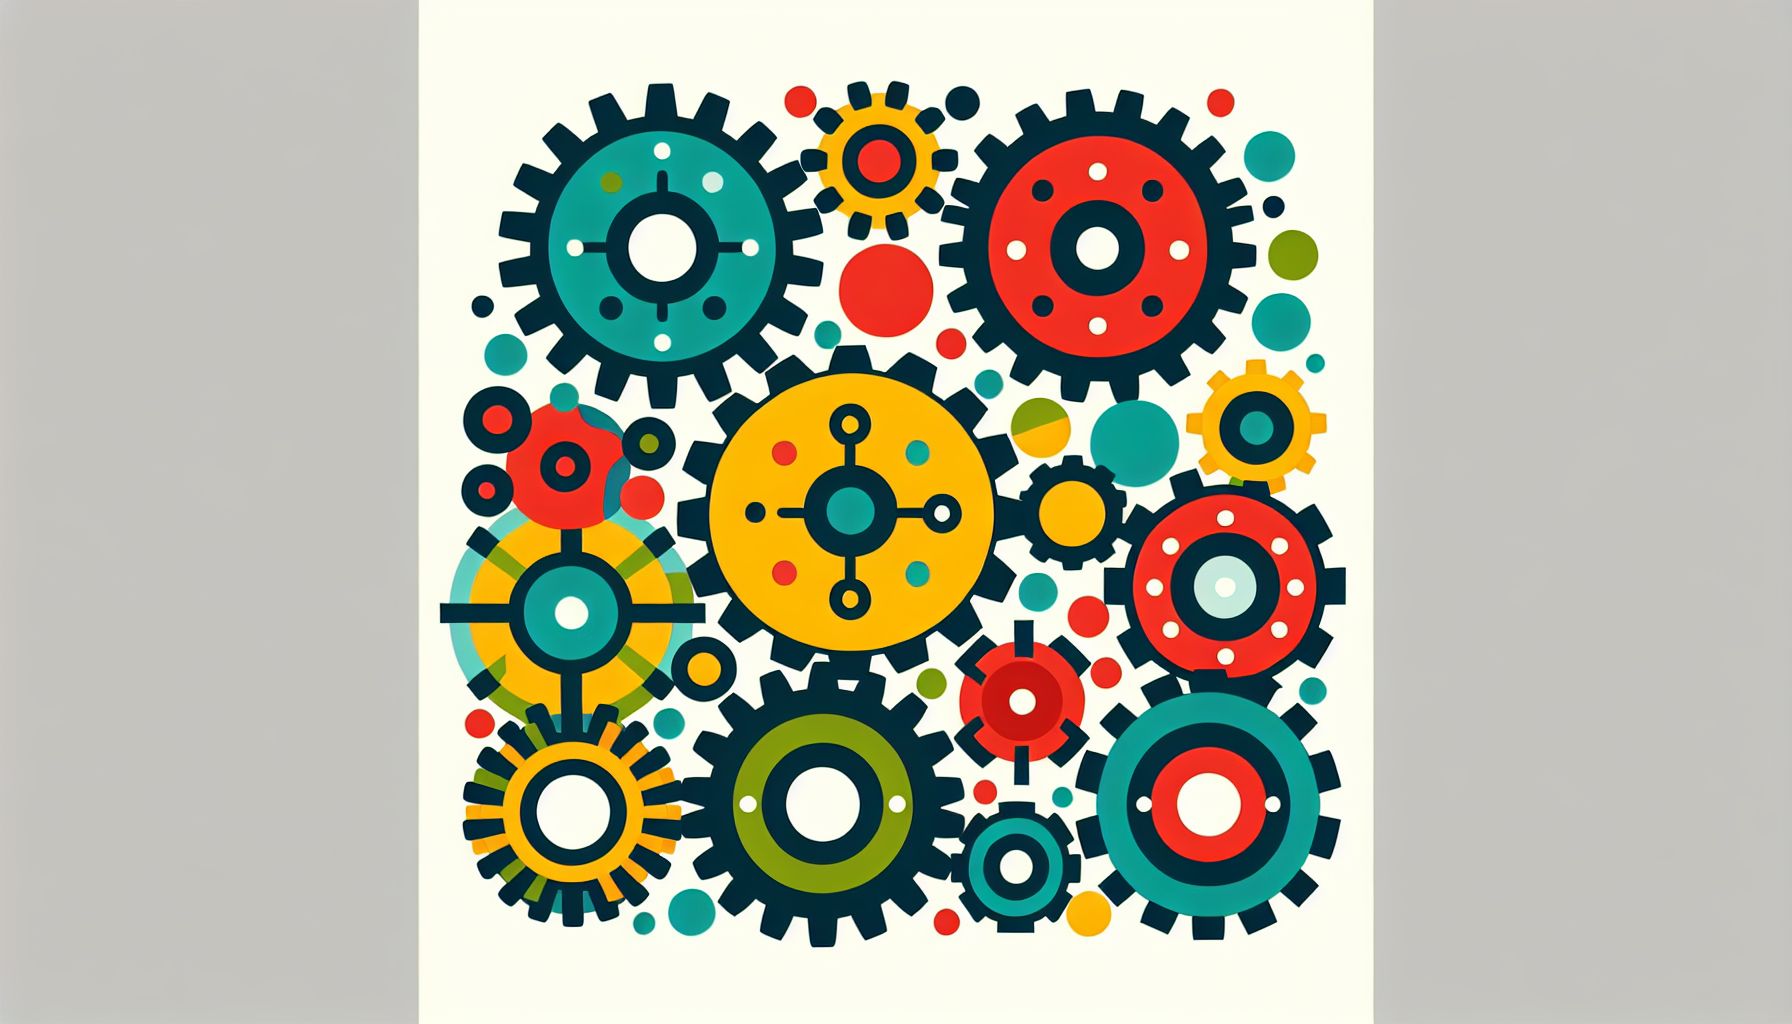 Cogs in flat illustration style and white background, red #f47574, green #88c7a8, yellow #fcc44b, and blue #645bc8 colors.